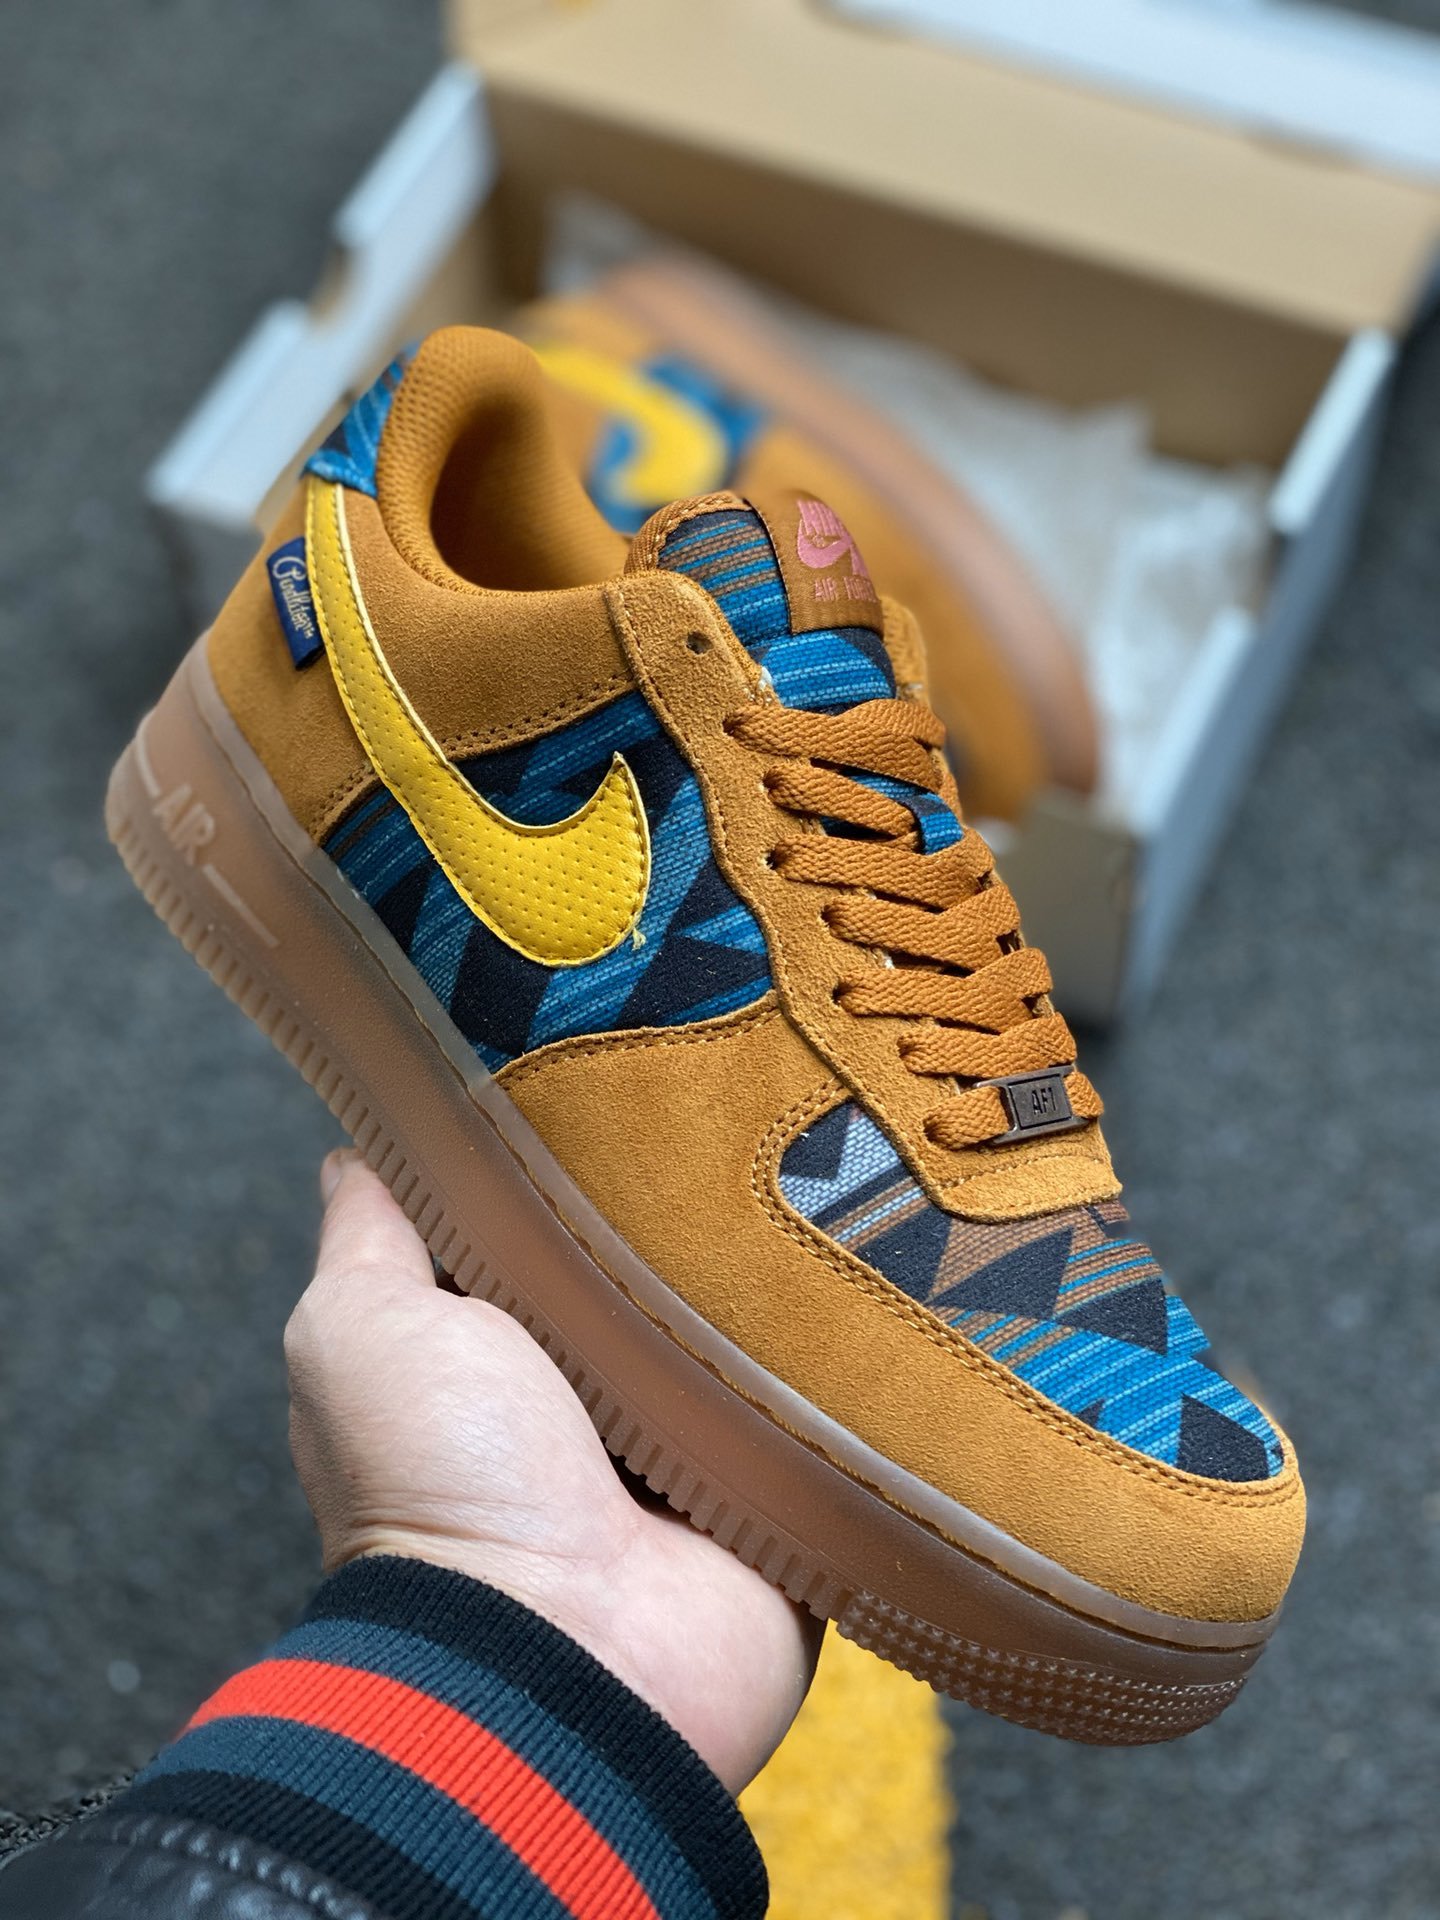 Nike Air Force 1 “N7” Gold Suede/Dark Sulfur CQ7308-700 For Sale ...